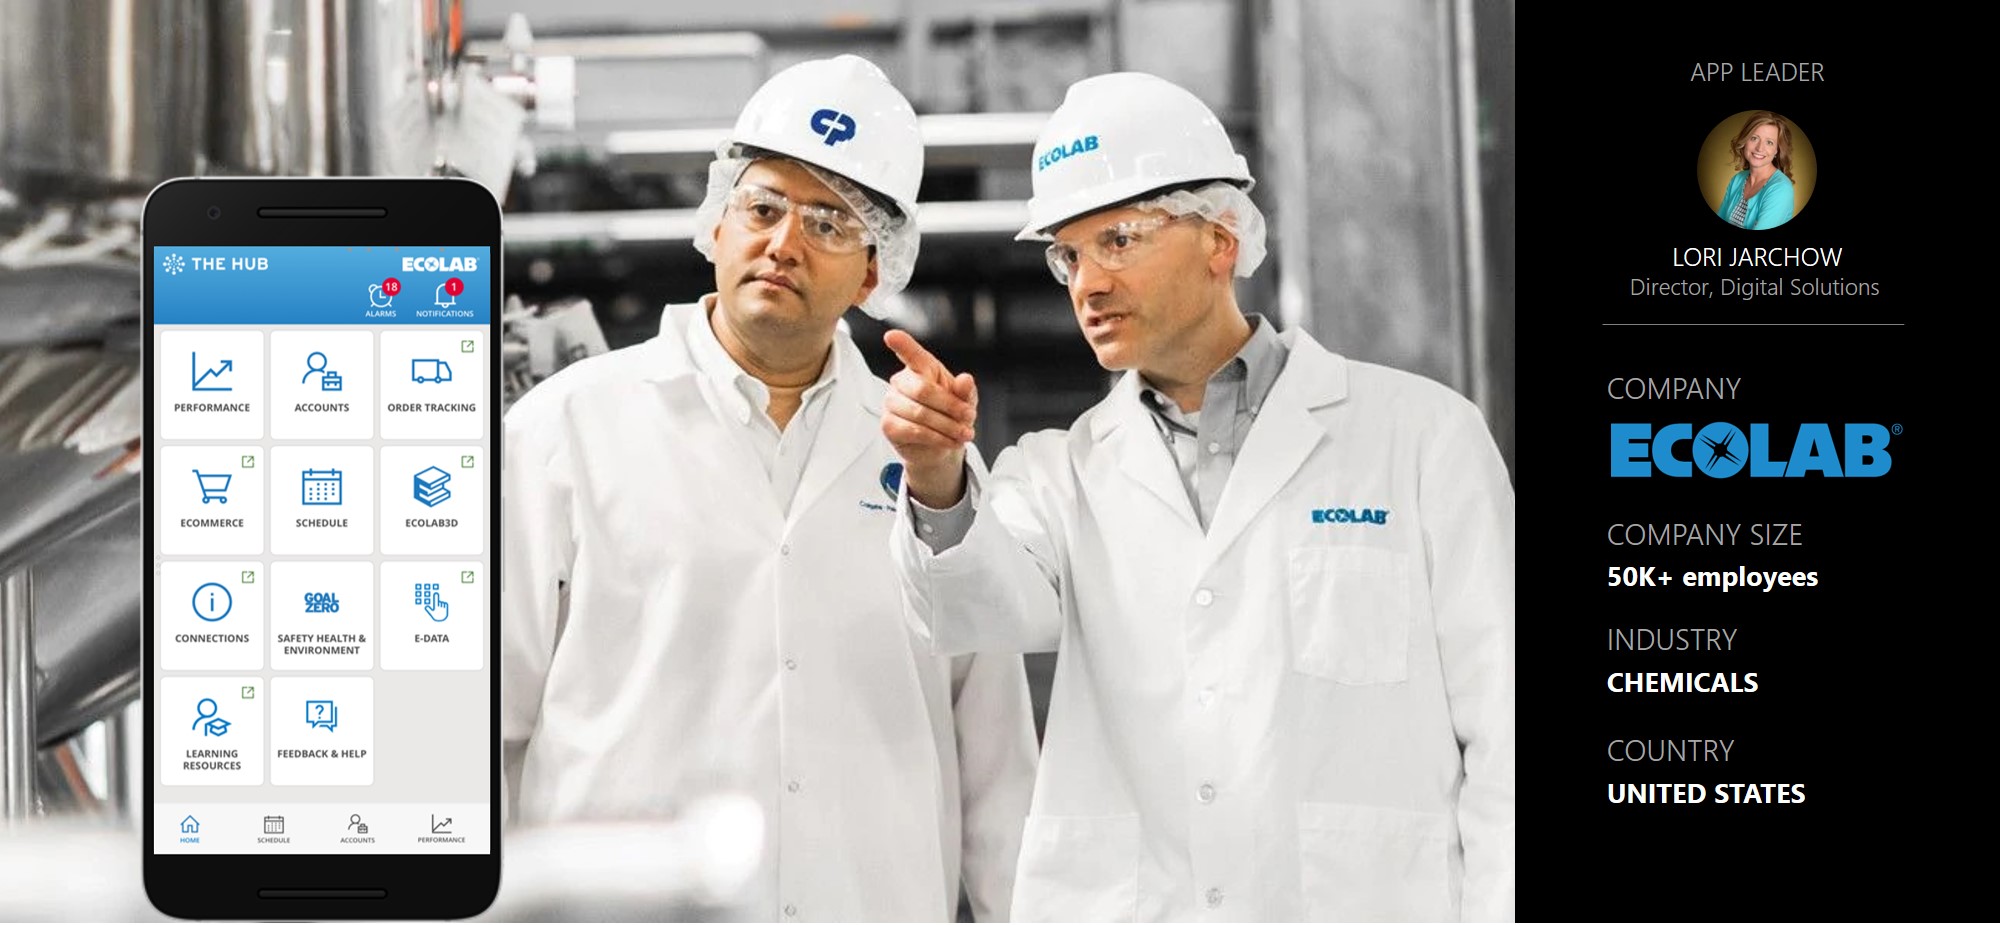 Banner image for Ecolab story. Mentions App leader Lori Jarchow, 50K+ employees, Industry - Chemicals, Country - United States